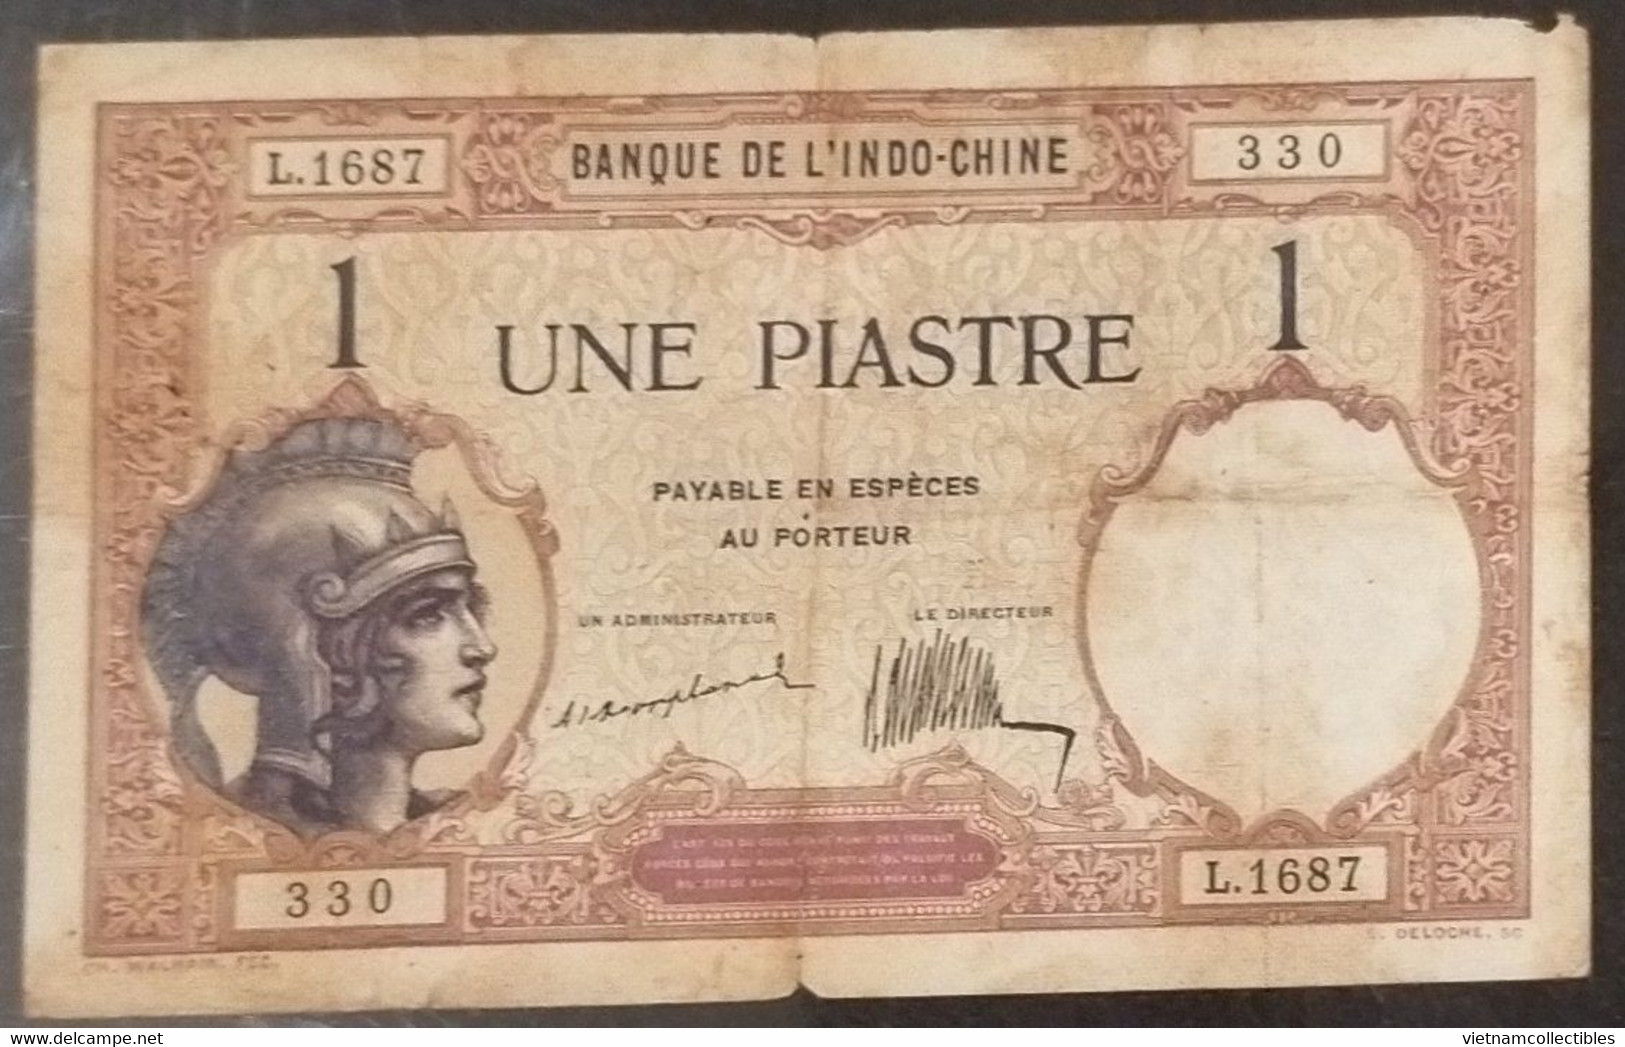 French Indochina Indo China Indochine Laos Vietnam Cambodia 1 Piastre Fine Banknote Note 1921-31 - Pick # 48a / 2 Photos - Indochina